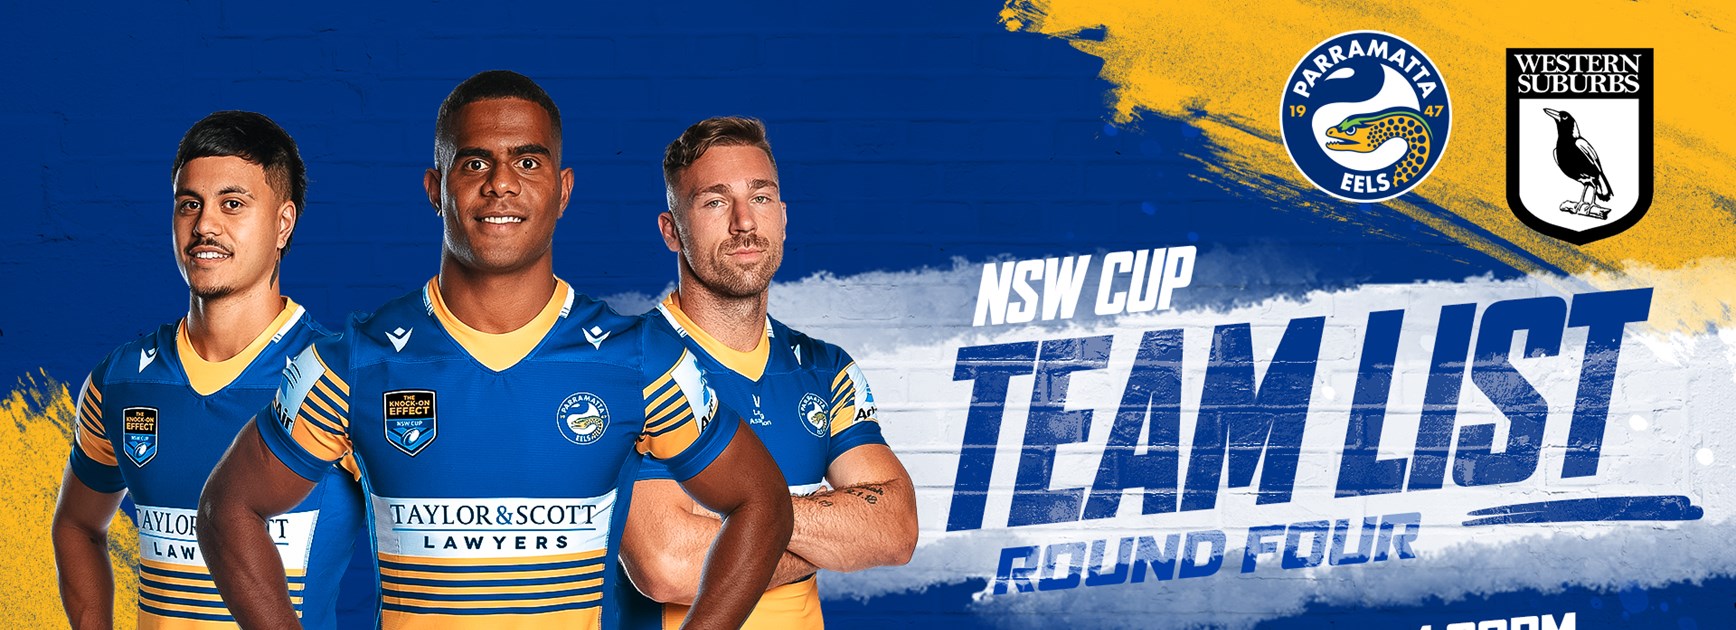 NSW Cup Team List - Magpies v Eels, Round Four